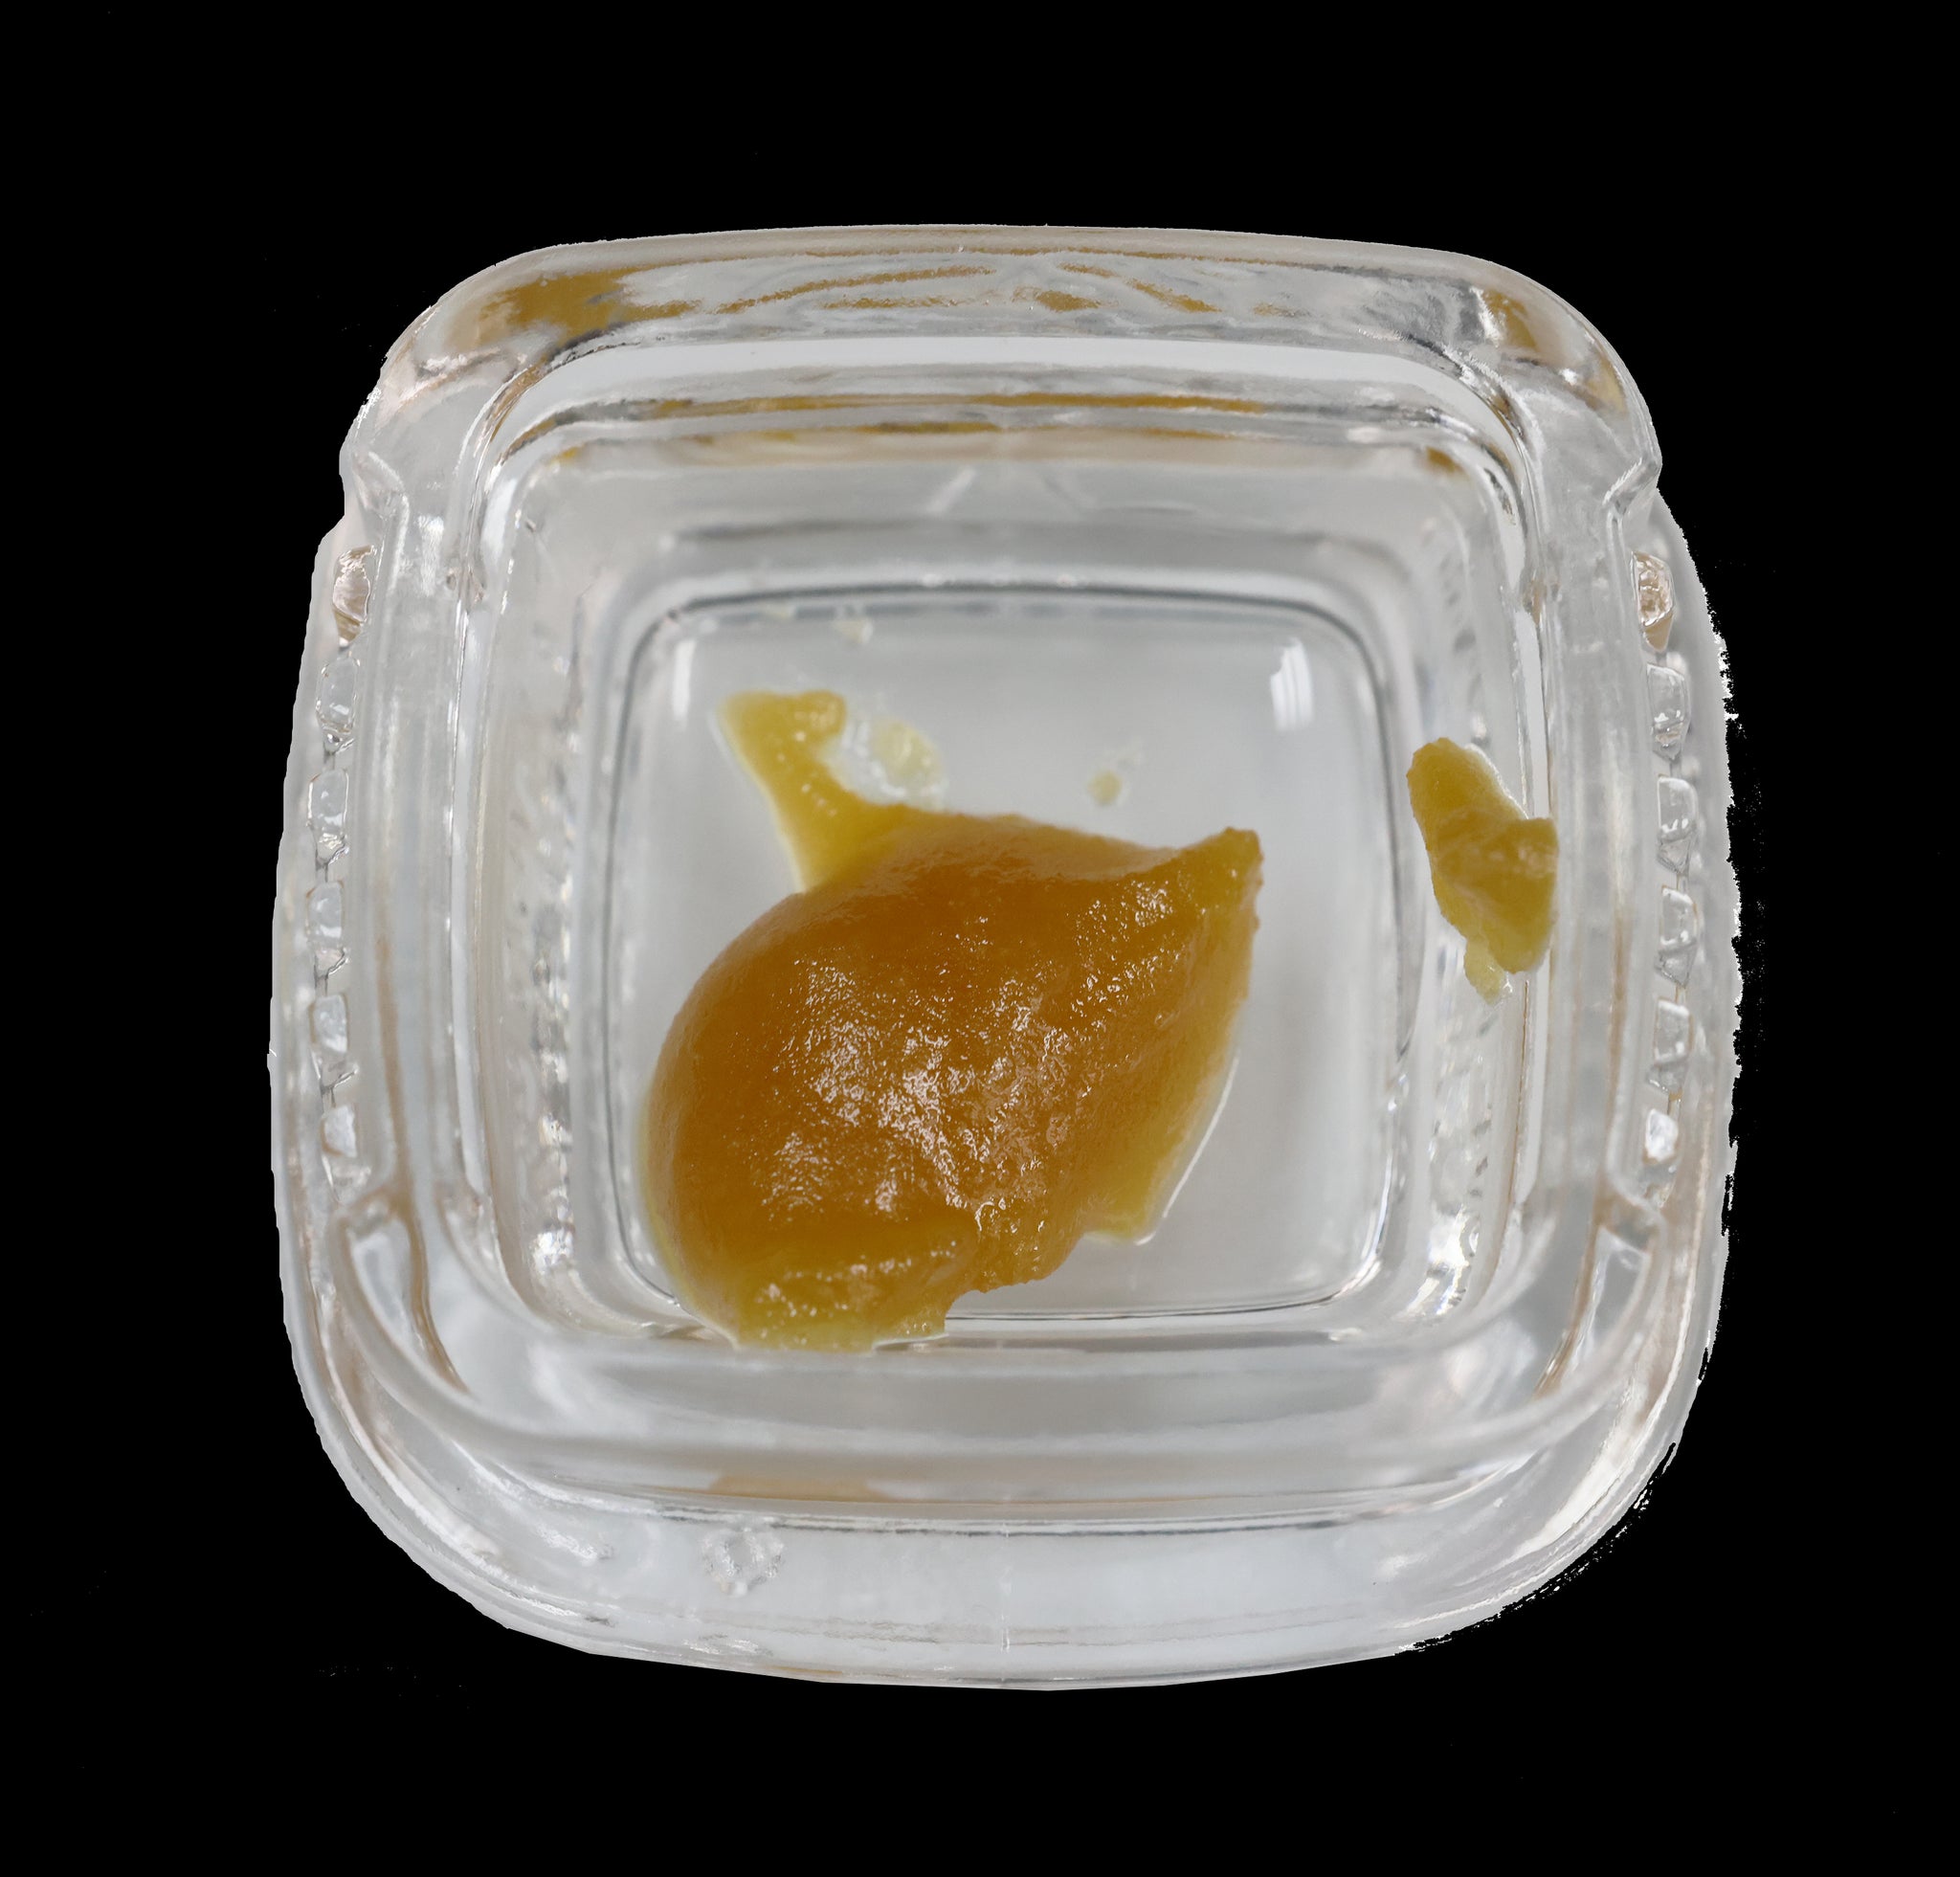 Kiwi High THCA Live Resin Concentrate